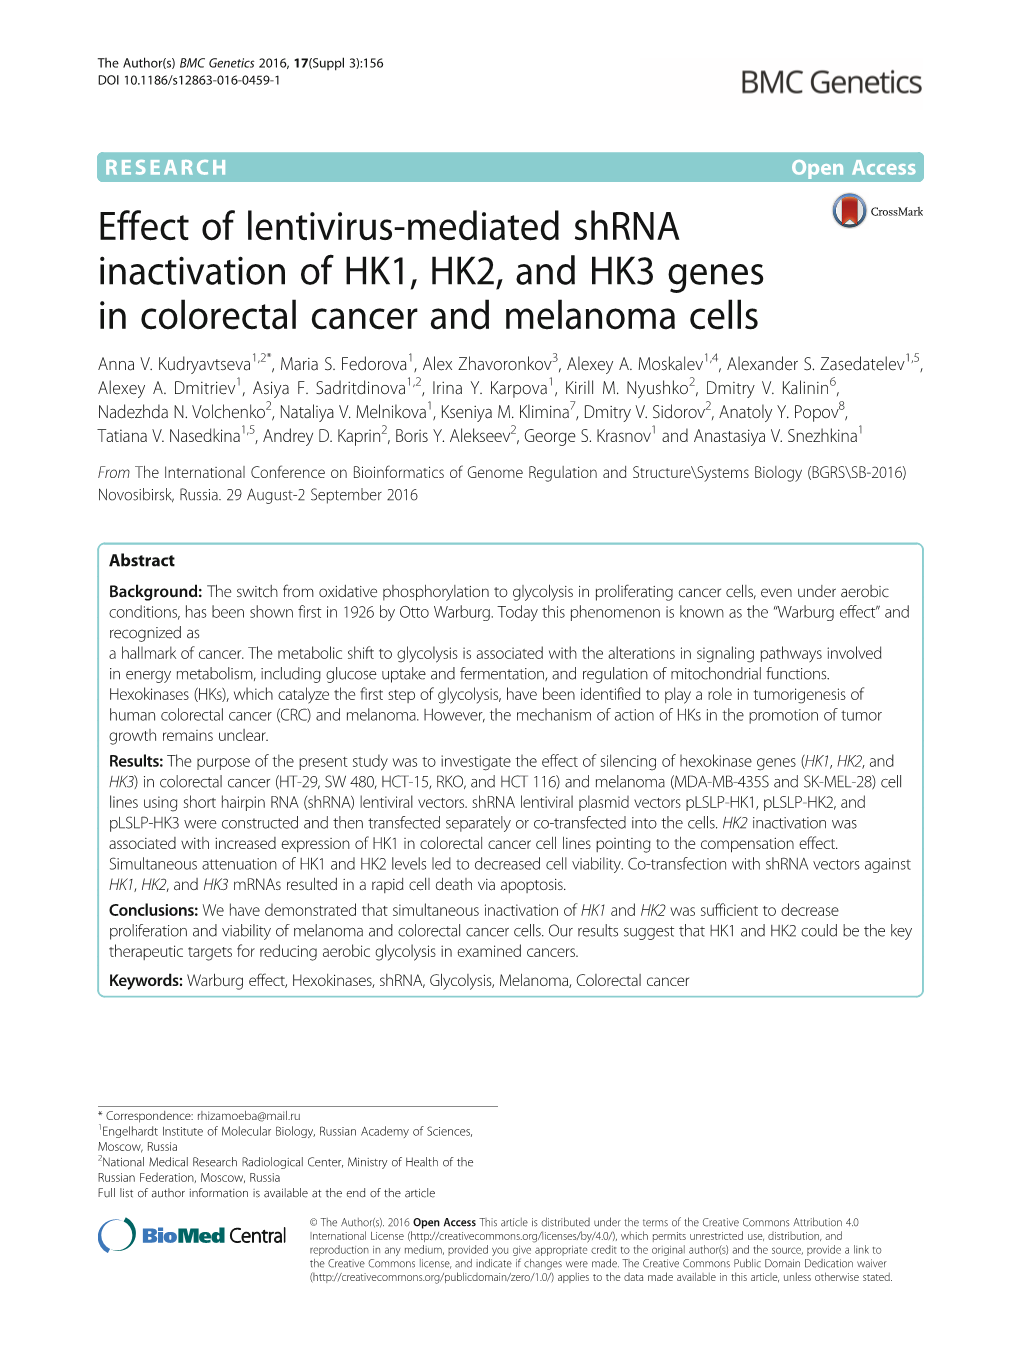 Effect of Lentivirus-Mediated Shrna Inactivation of HK1, HK2, and HK3 Genes in Colorectal Cancer and Melanoma Cells Anna V